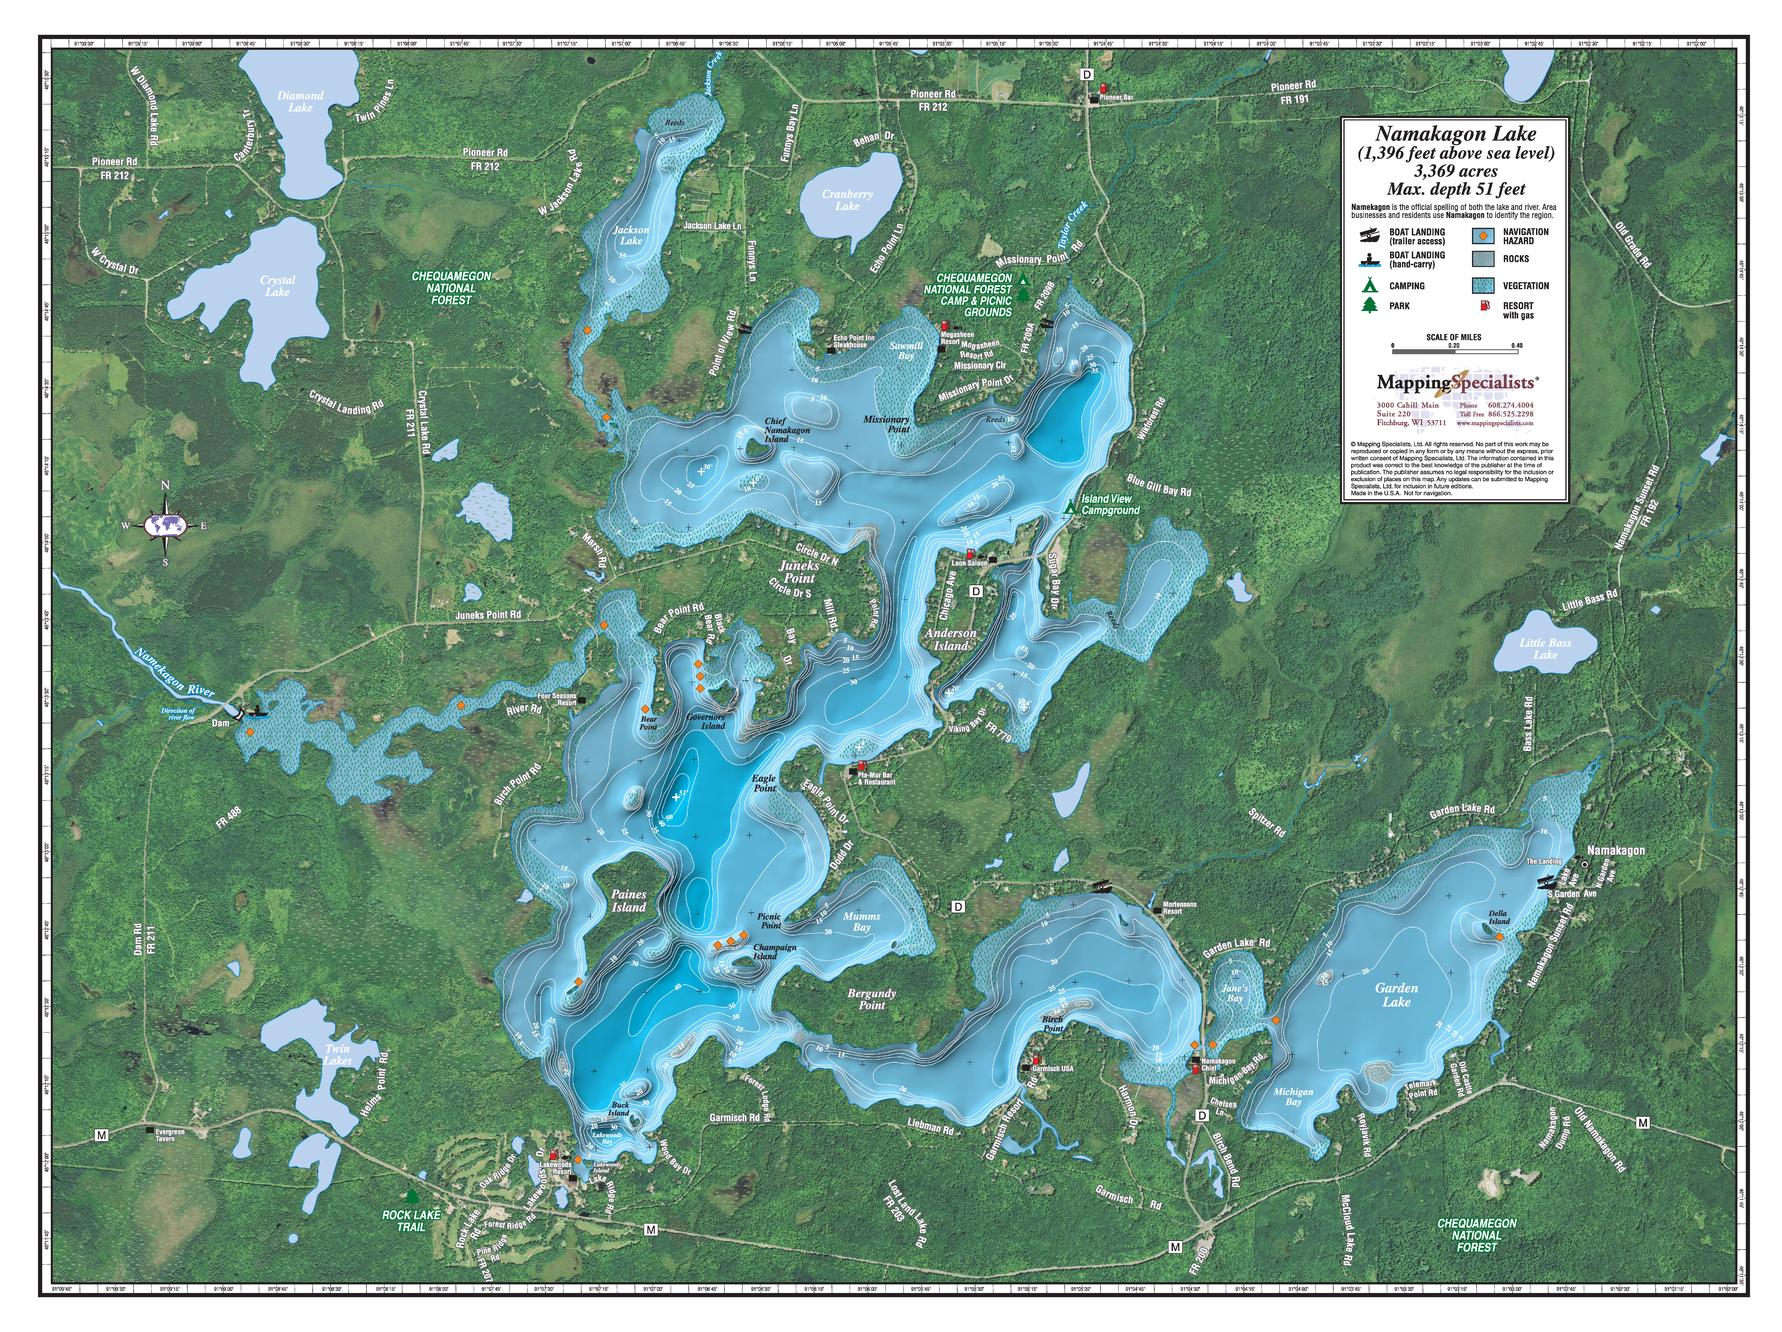 Namakagon Lake by Mapping Specialists - The Map Shop